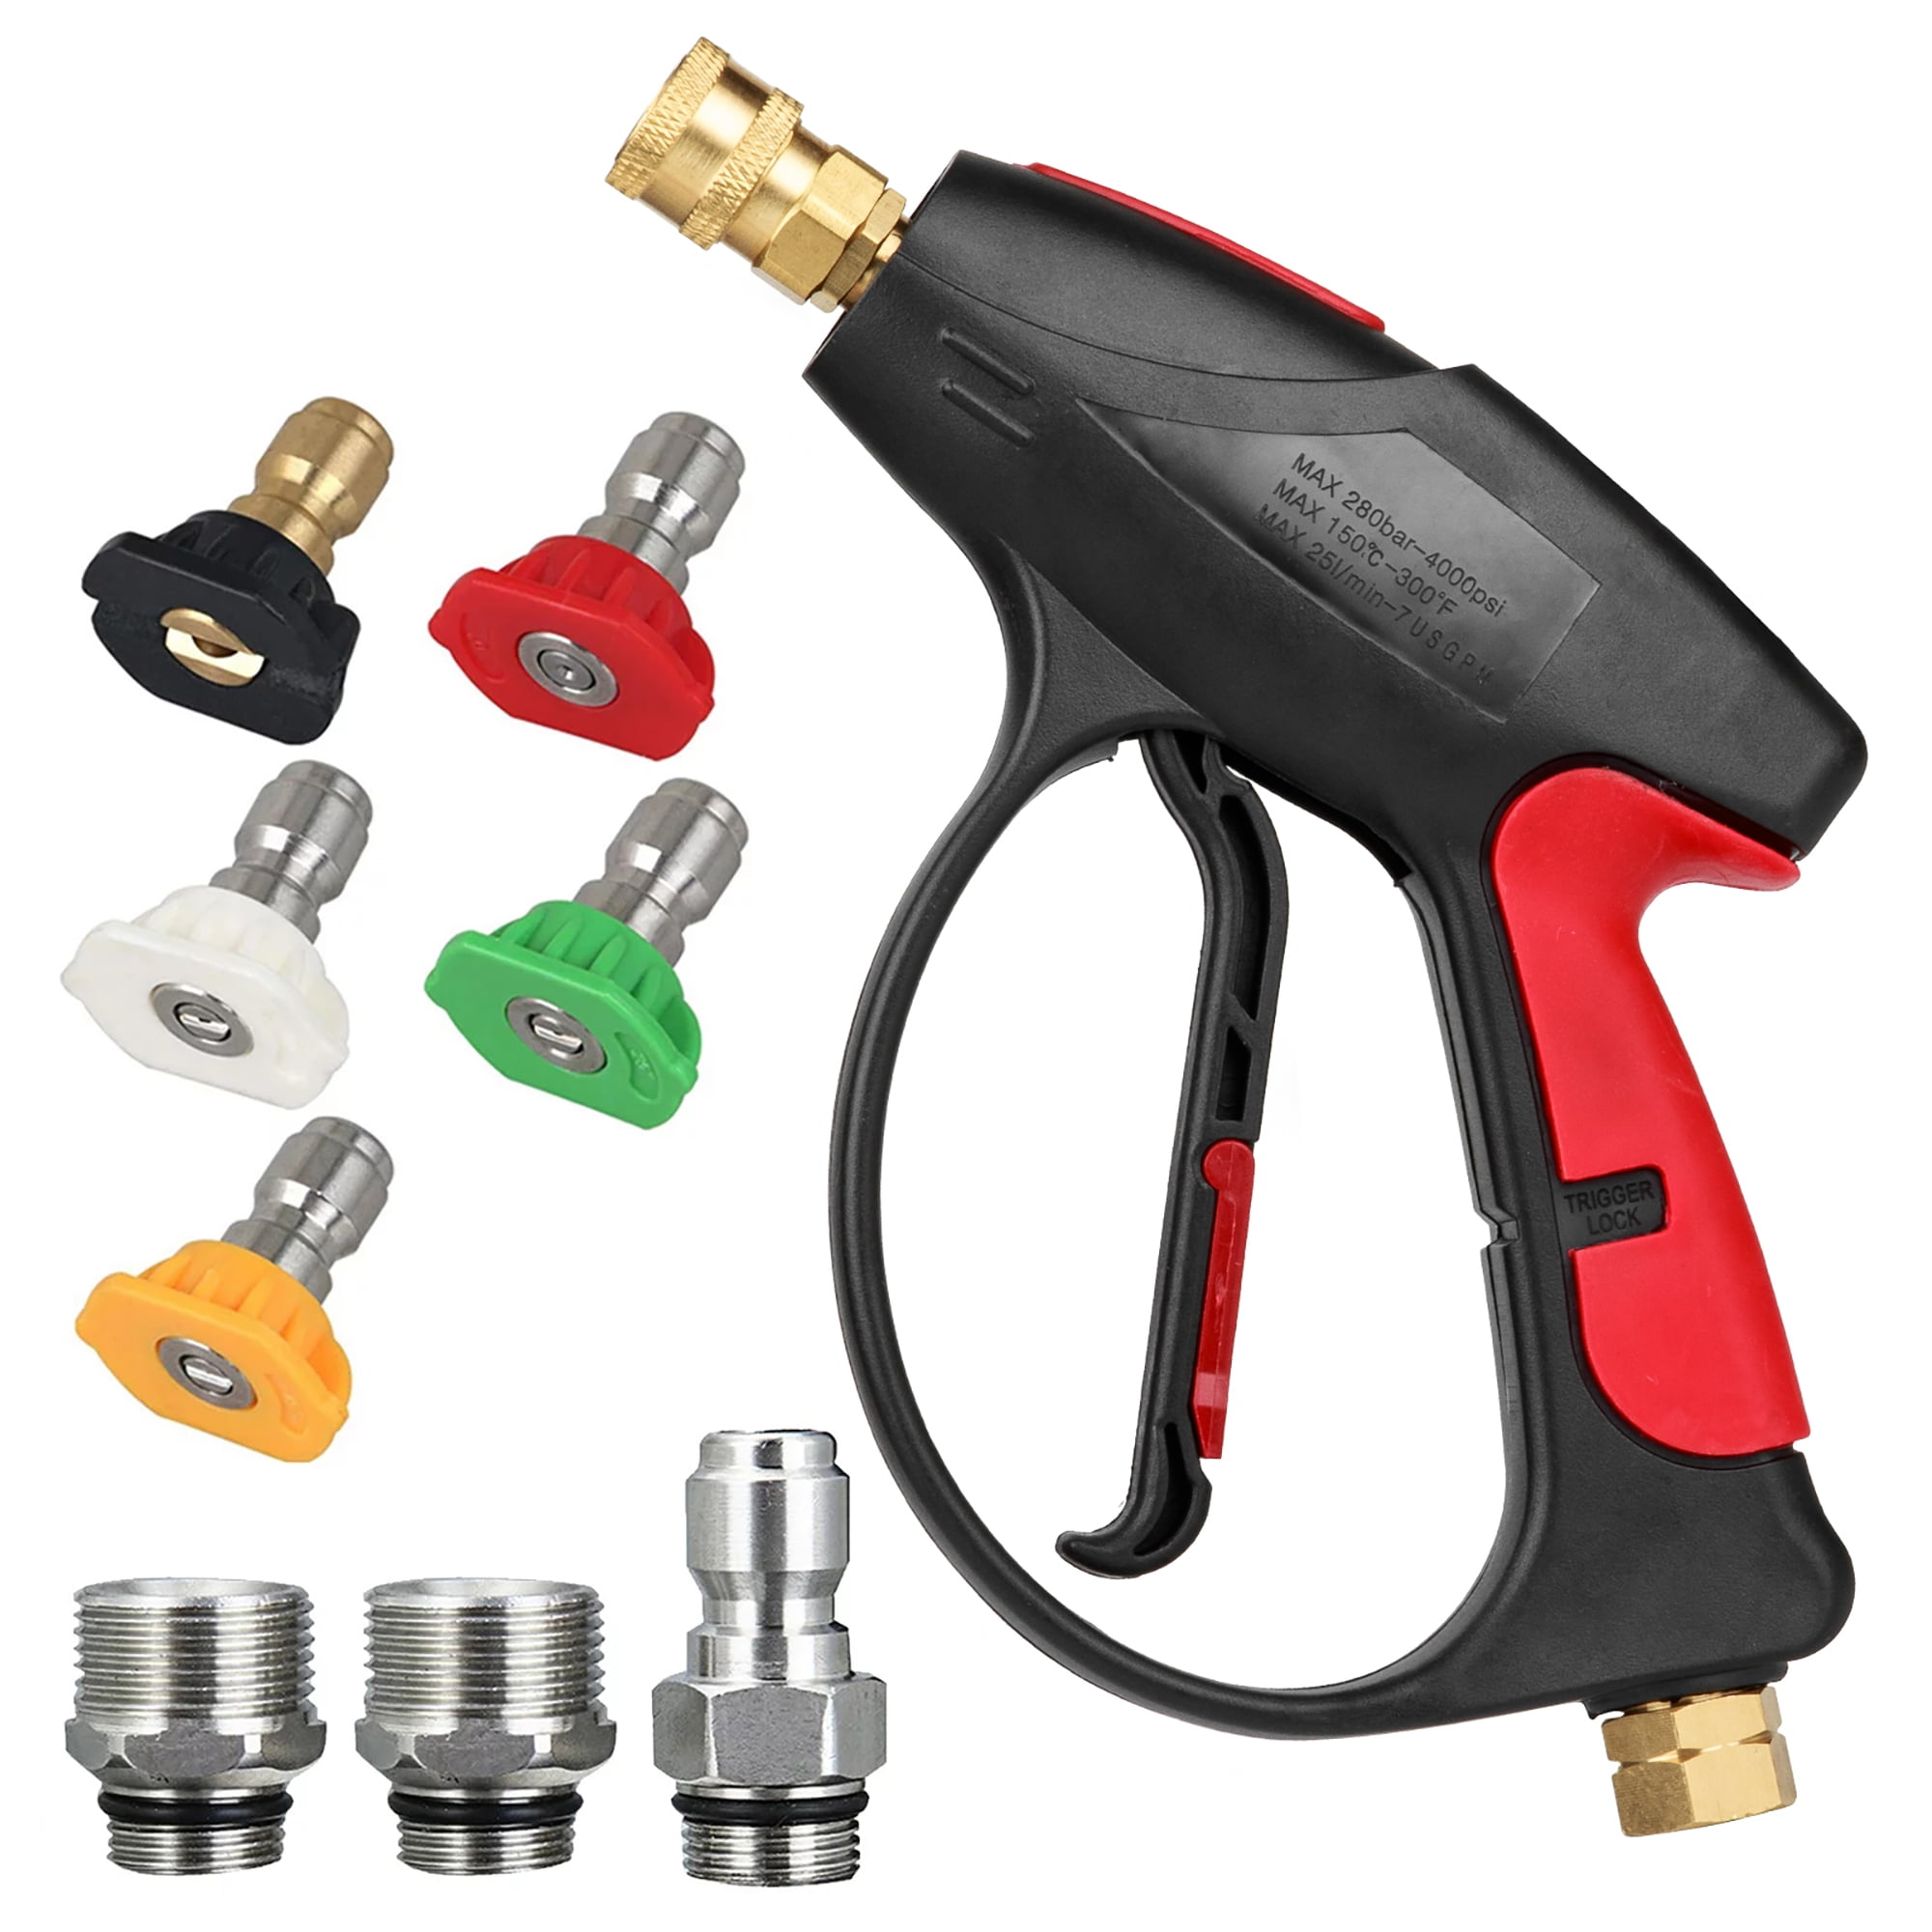 Dropship 1/4in High Pressure Car Washer Sprayer 3000PSI Pressure Washer Gun  Car Foam Sprayer With Jet Wand 5 Nozzle Tips M22-14 Connector to Sell  Online at a Lower Price